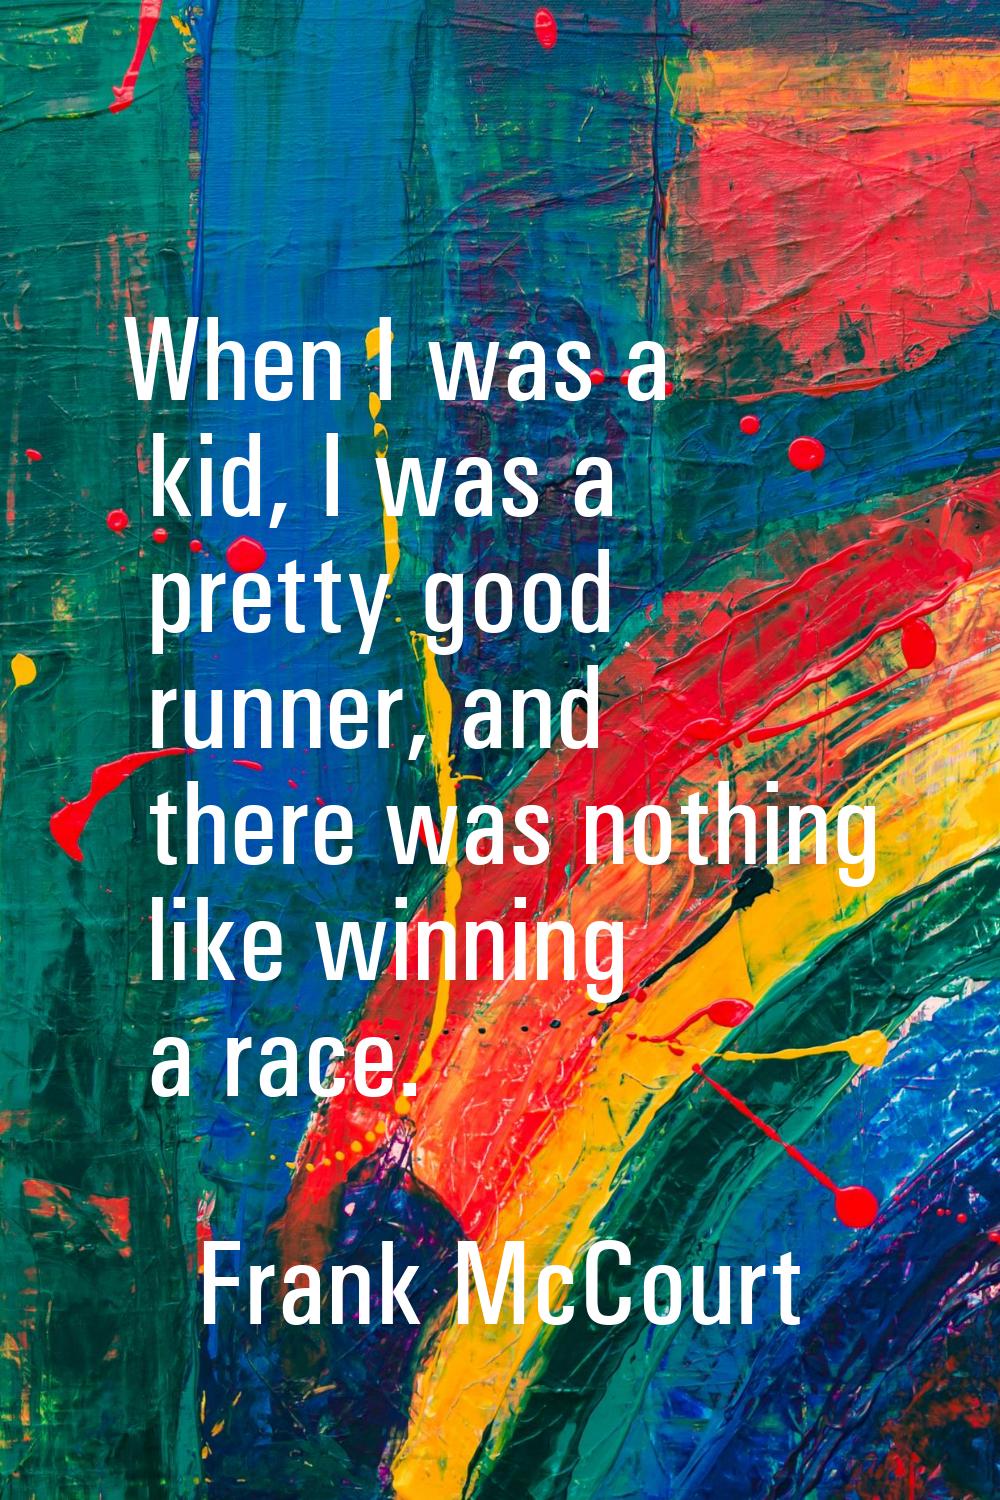 When I was a kid, I was a pretty good runner, and there was nothing like winning a race.